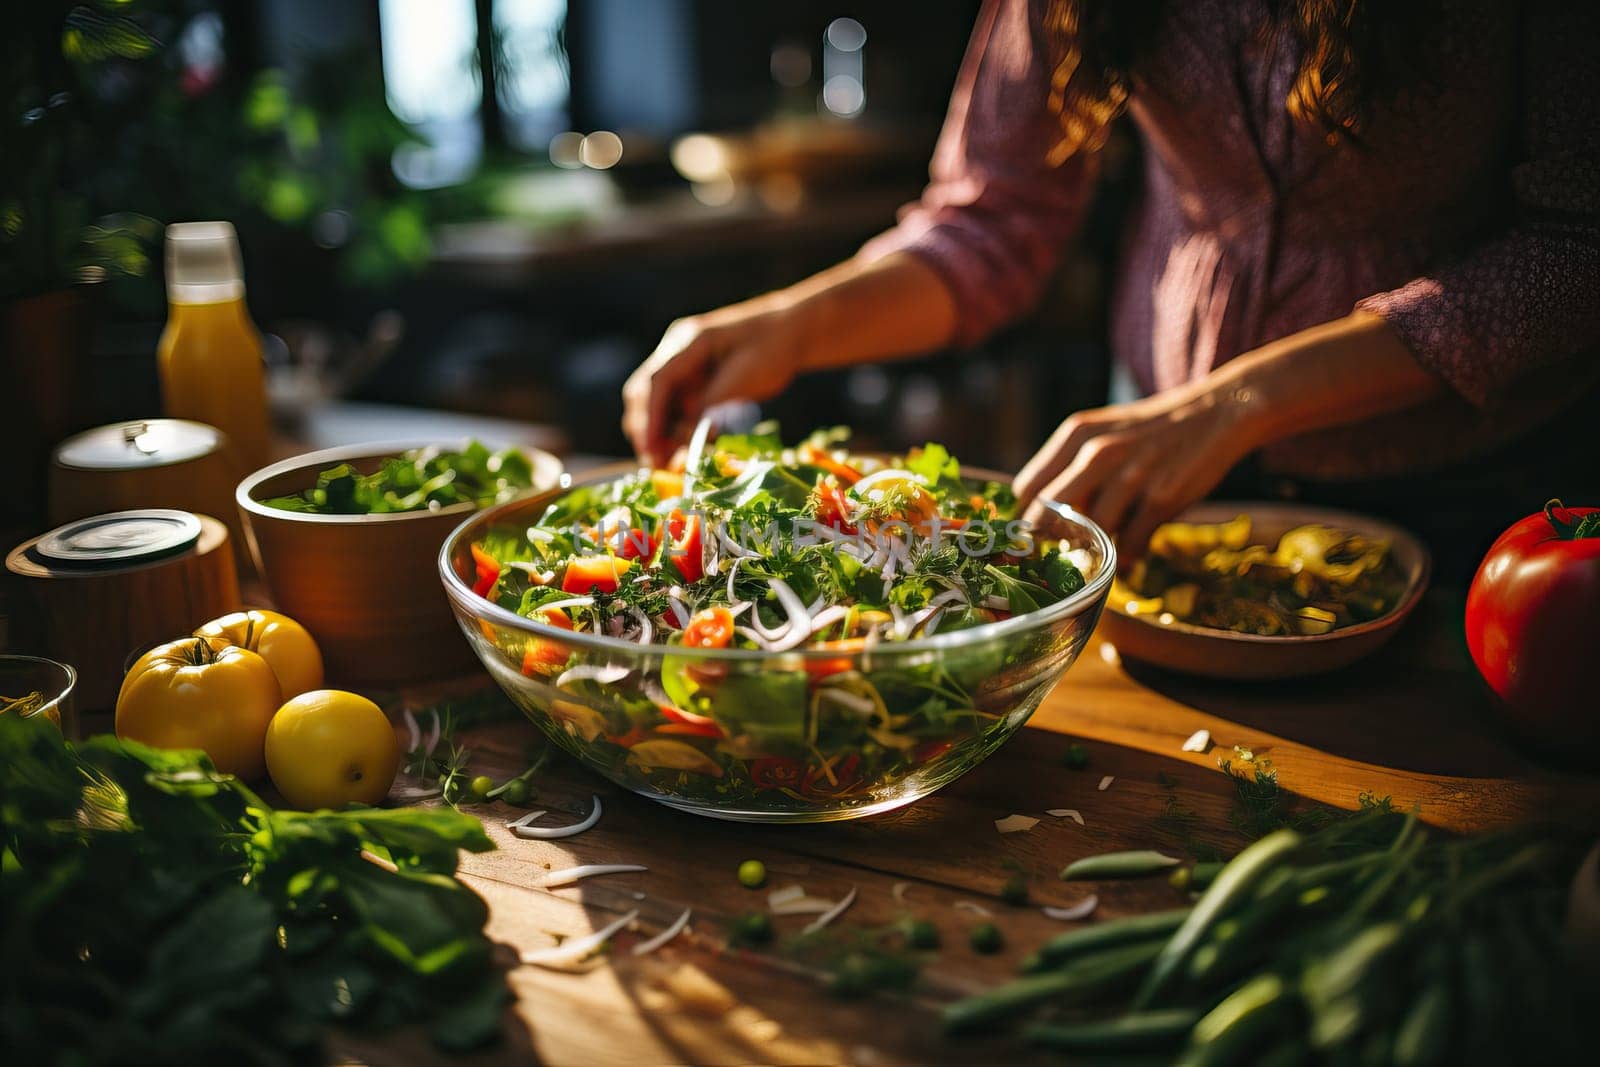 A woman prepares a vegetarian salad for herself in the kitchen, the concept of healthy eating.